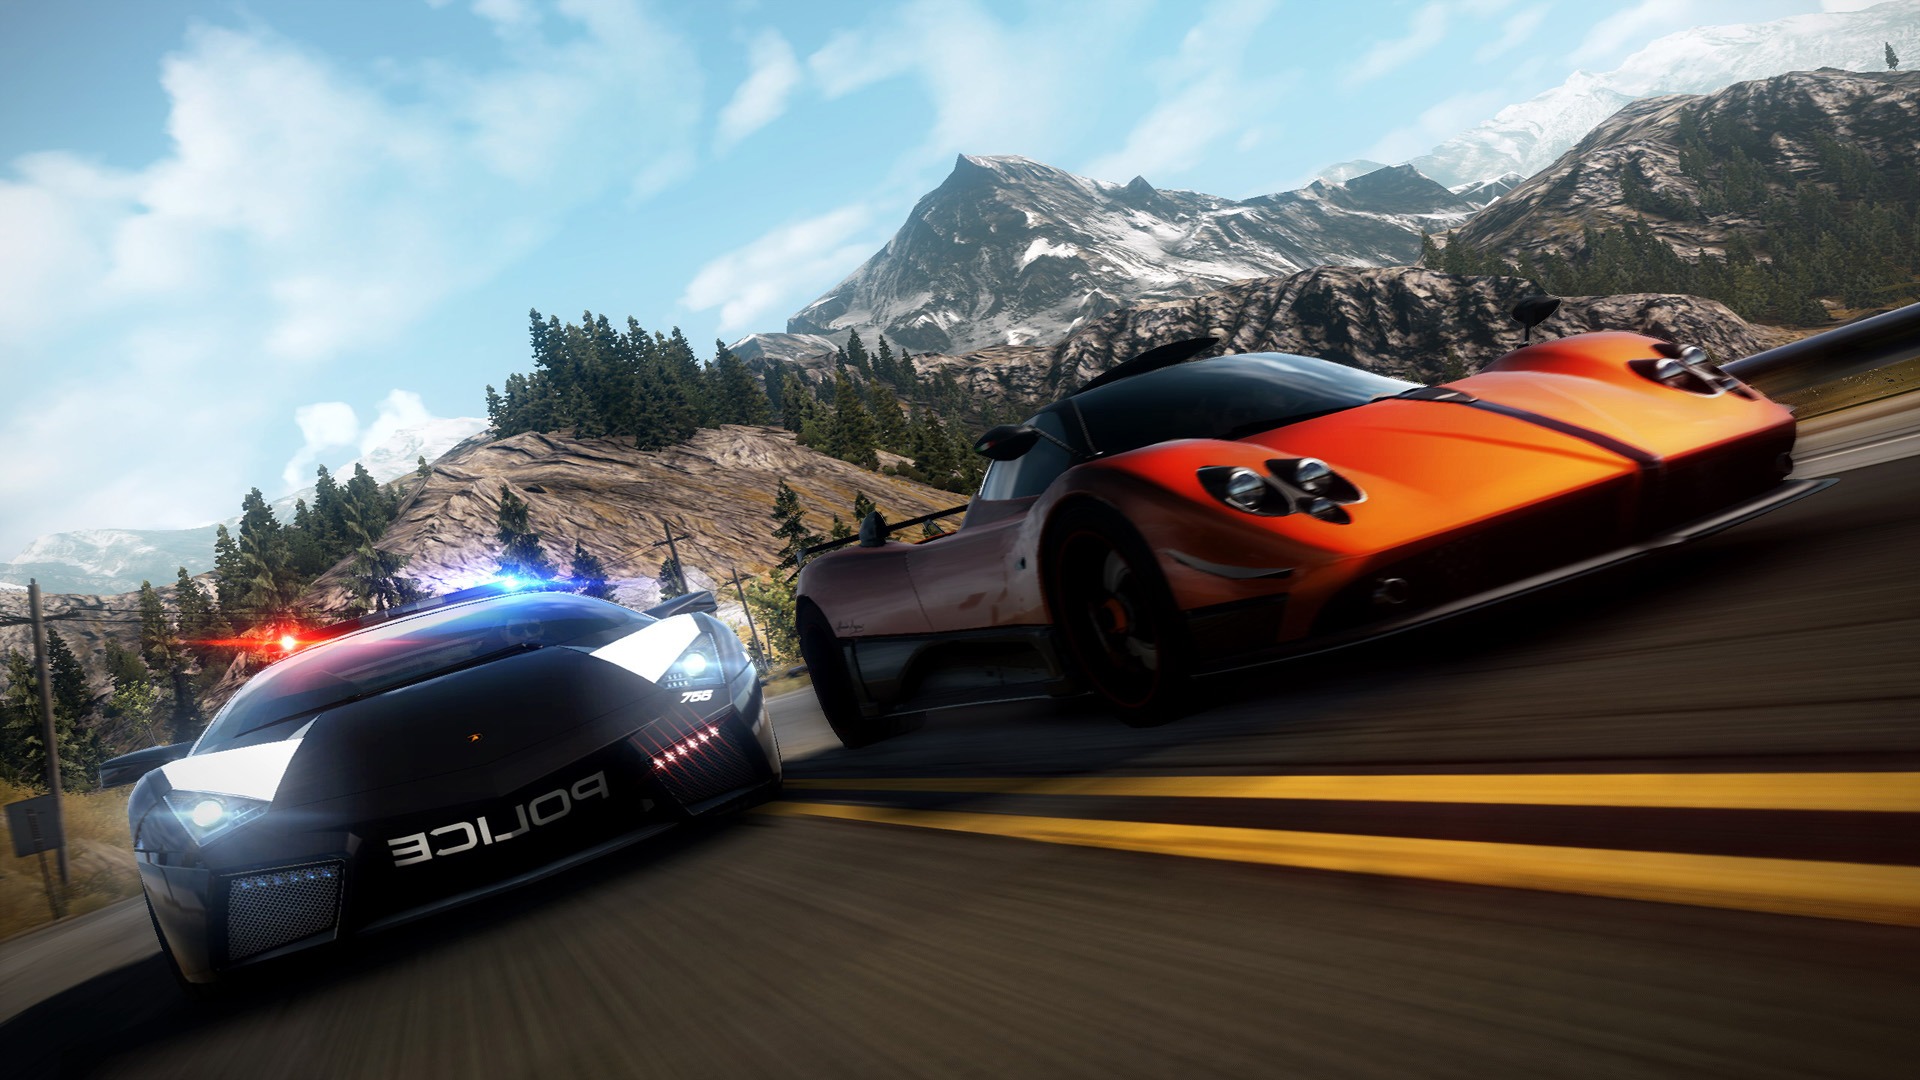 Need for Speed: Hot Pursuit 极品飞车14：热力追踪9 - 1920x1080